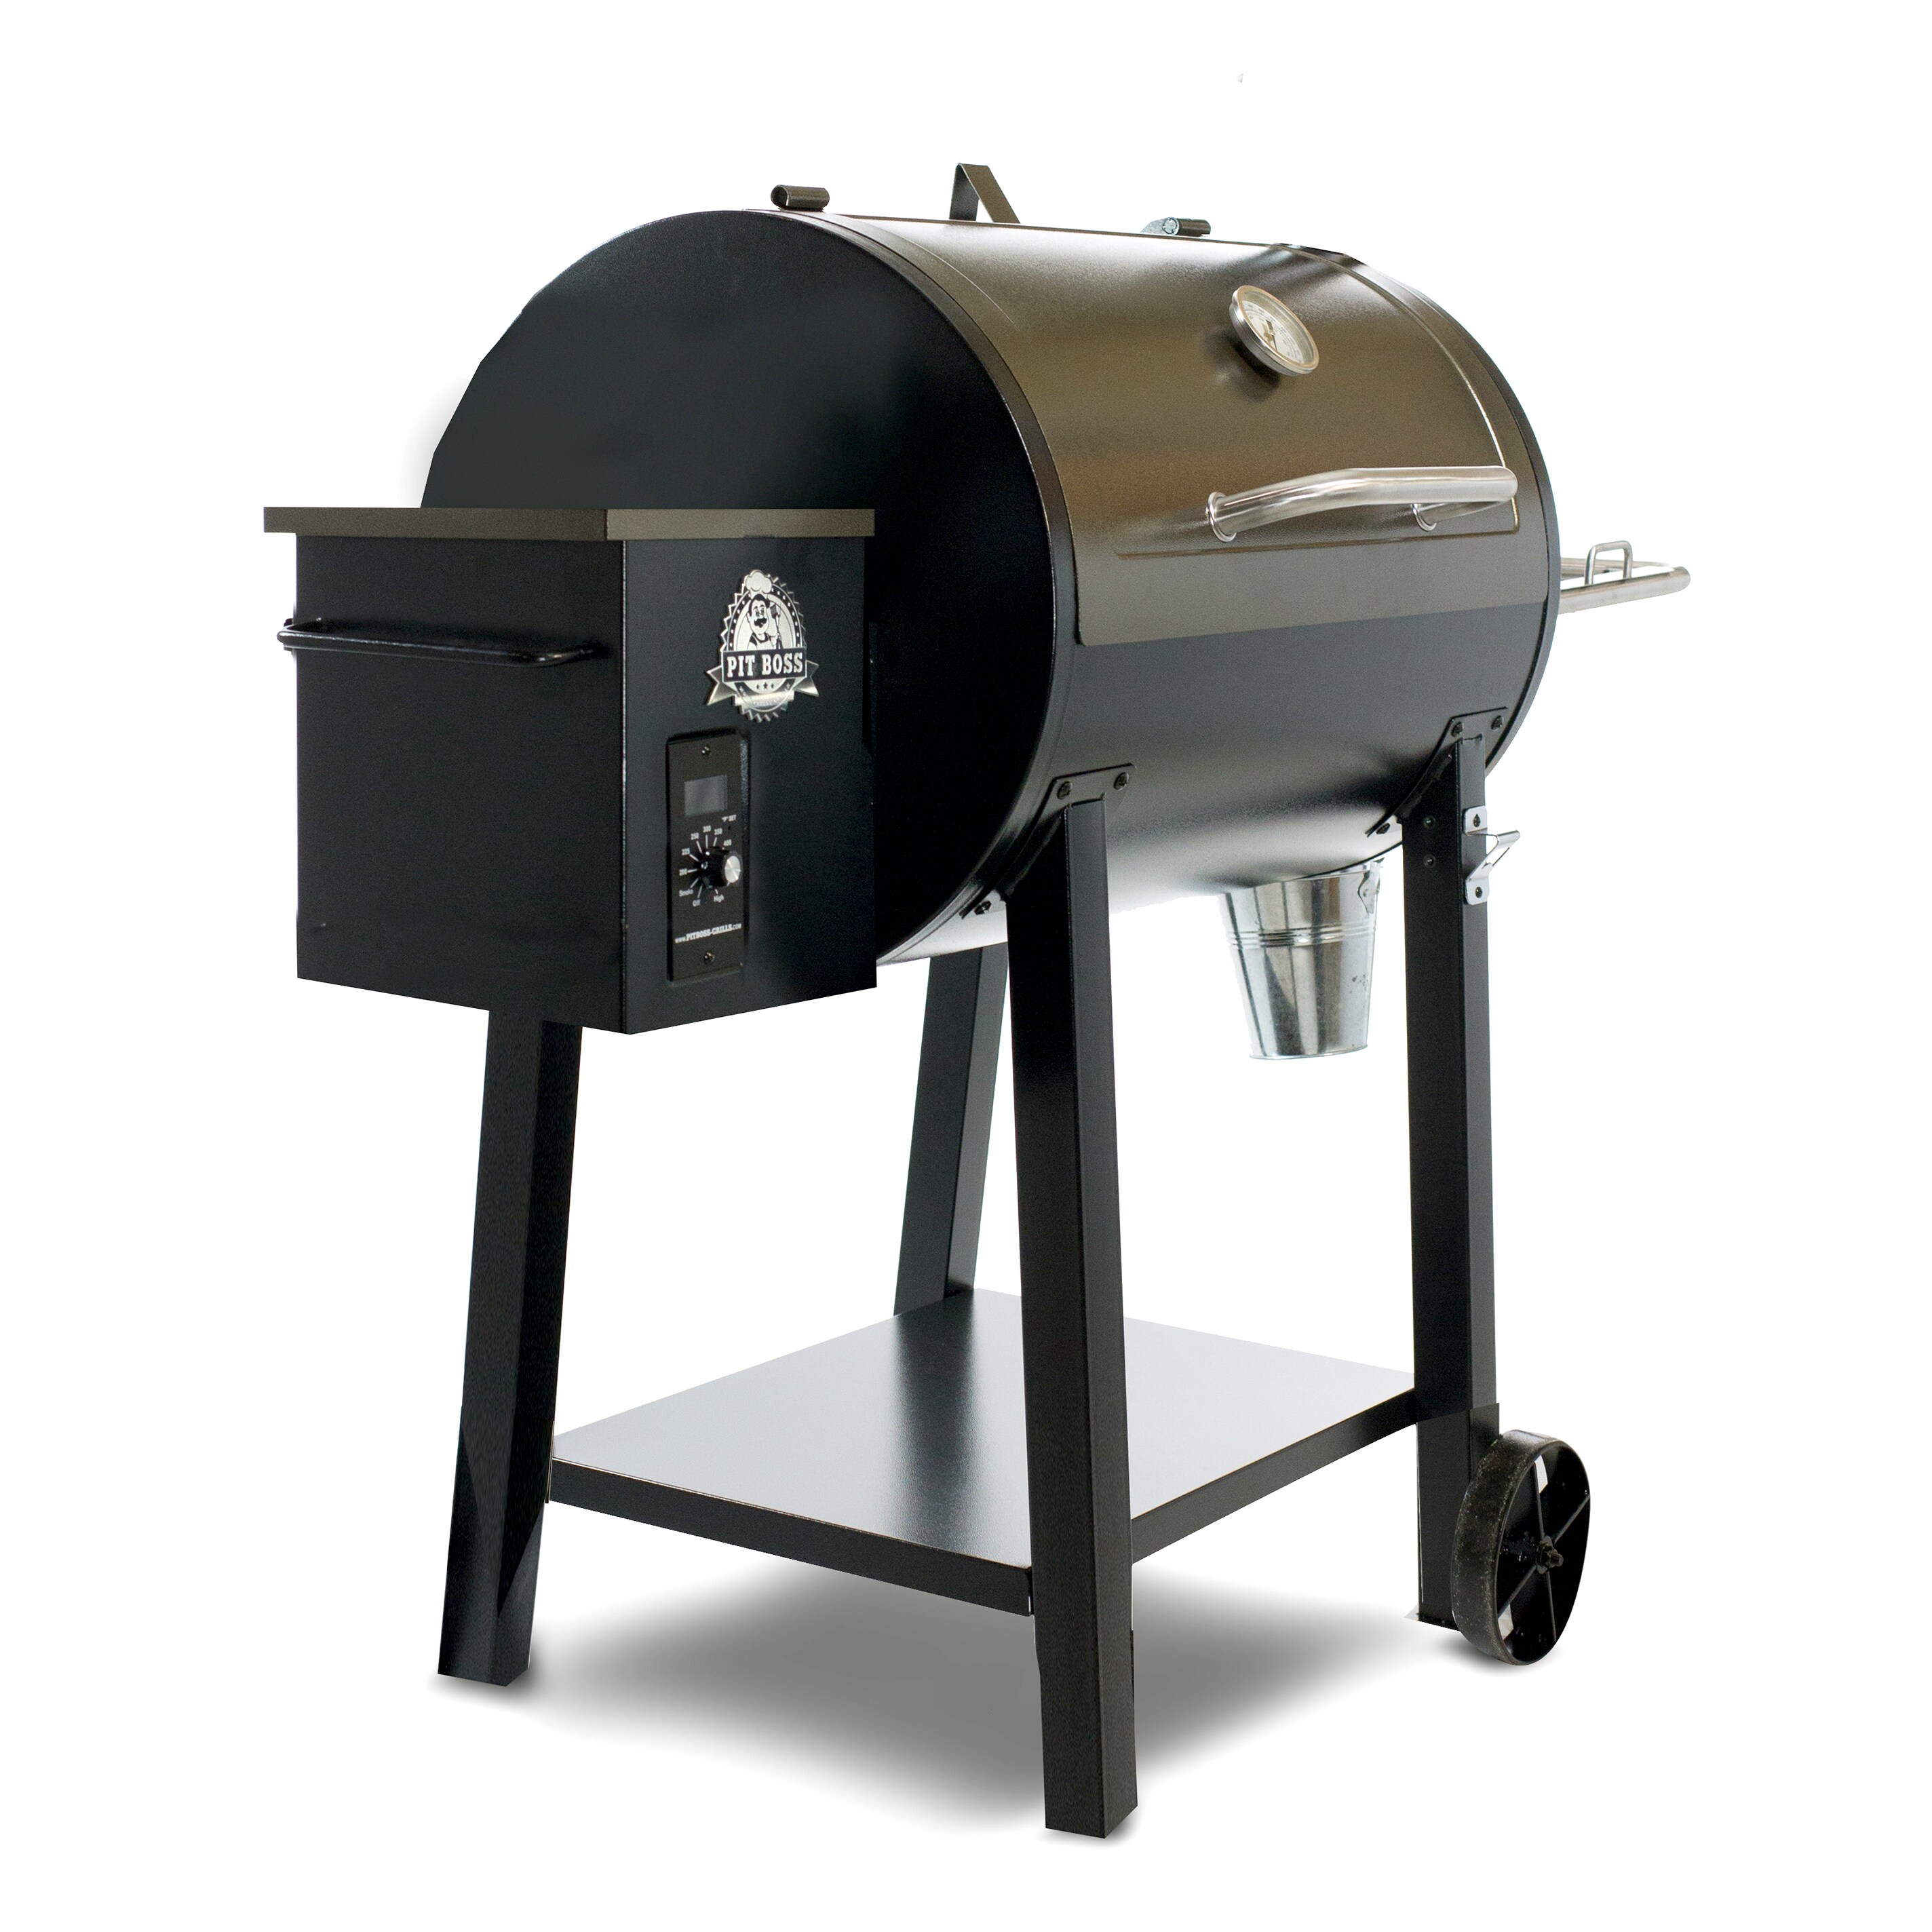 Pit Boss 465-Sq in Two-tone Black and Bronze Pellet Grill in the Pellet ...